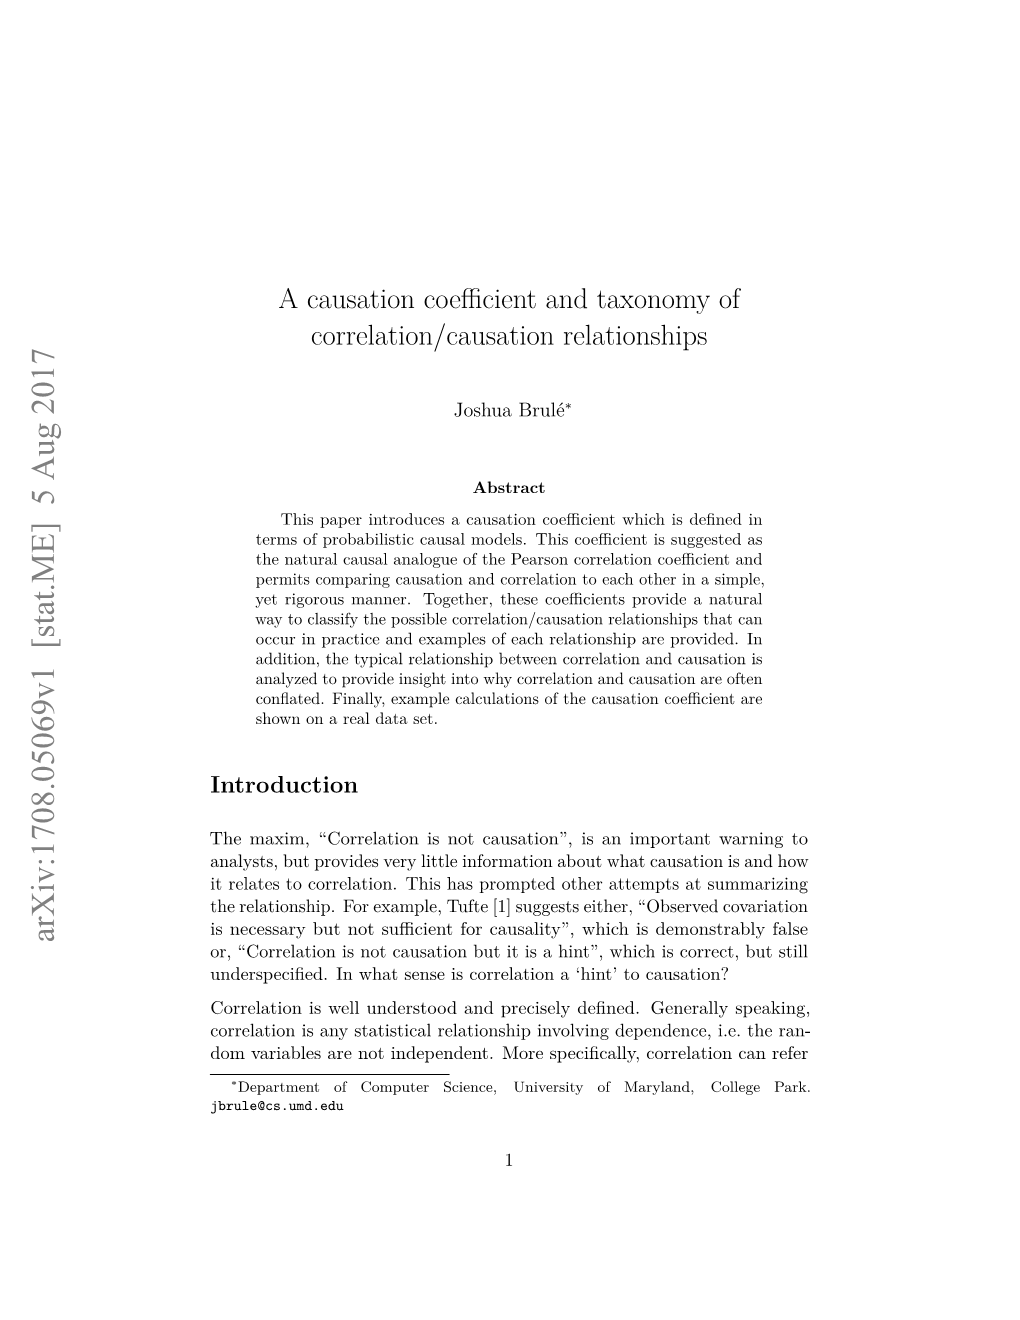 A Causation Coefficient and Taxonomy of Correlation/Causation Relationships